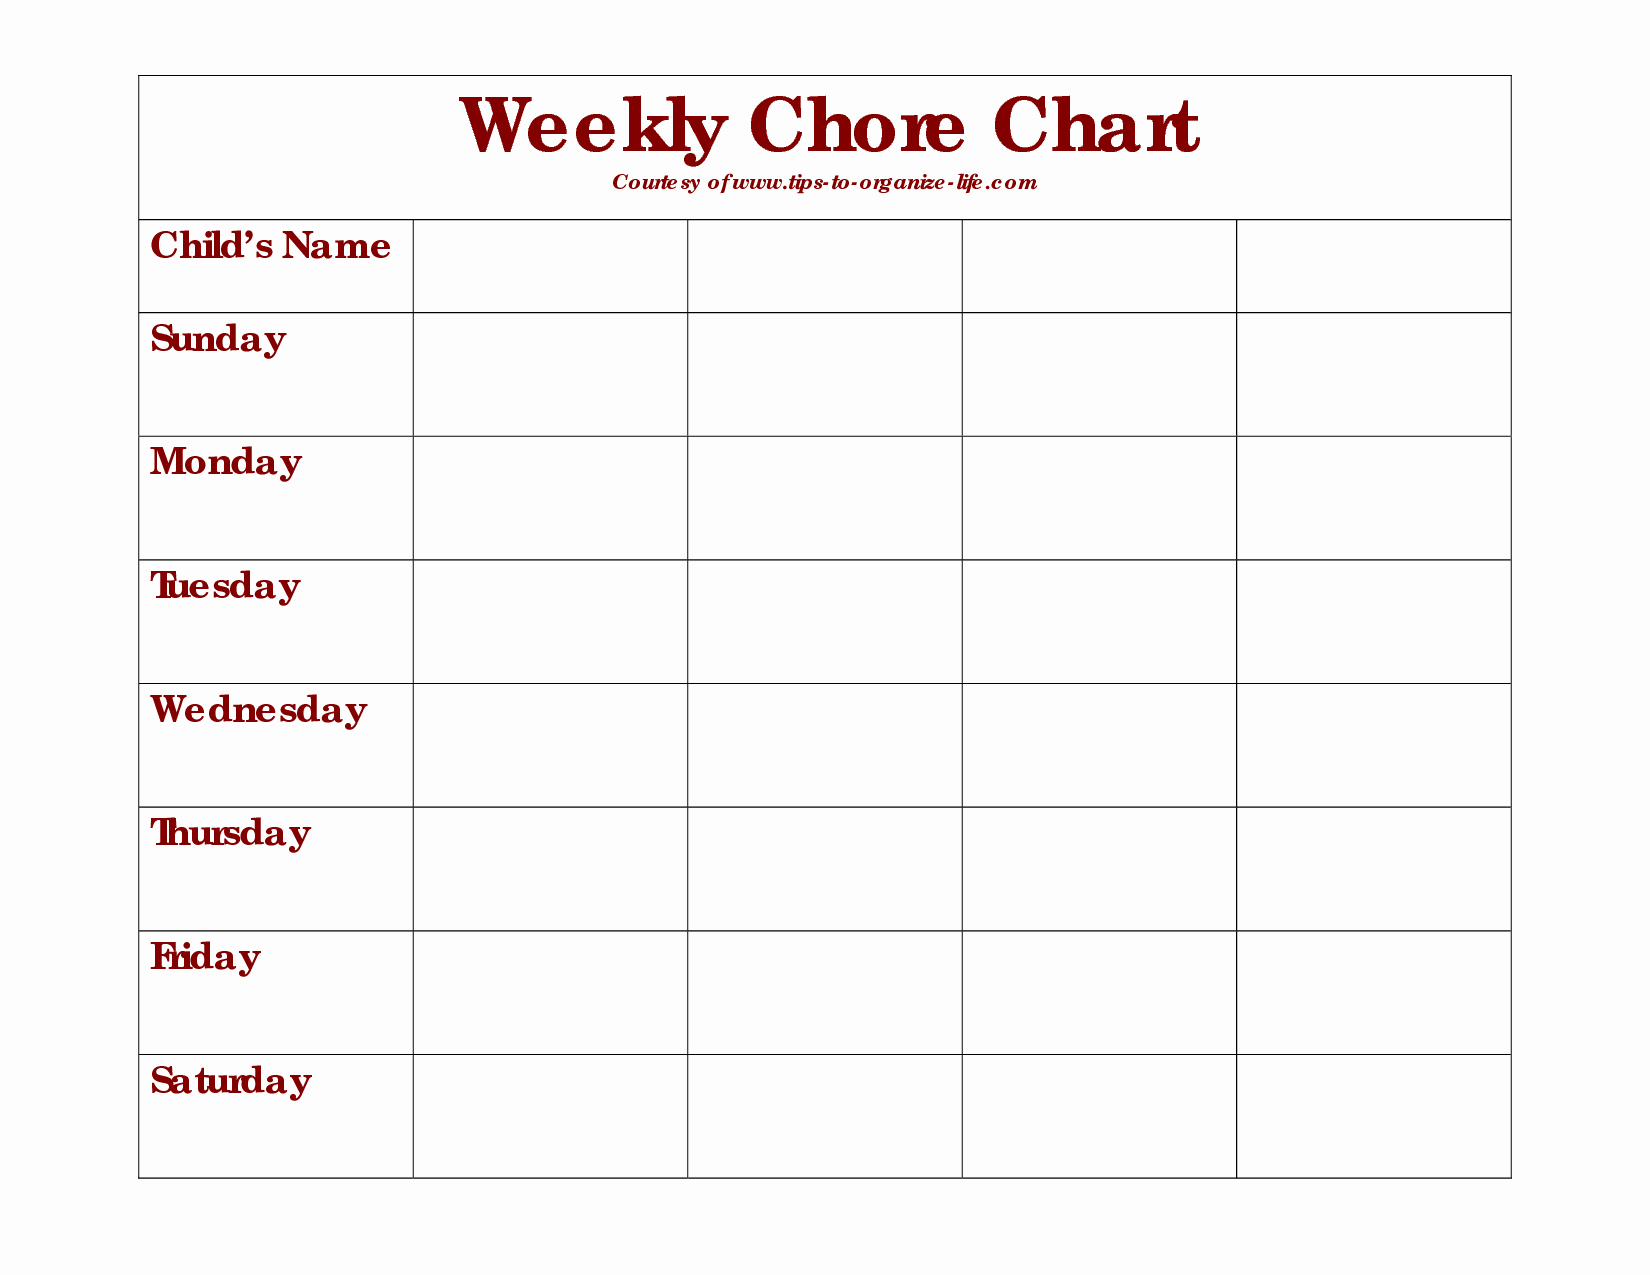 Monthly Chore Chart Template Elegant 9 Best Of Monthly Chore Chart Printable Templates